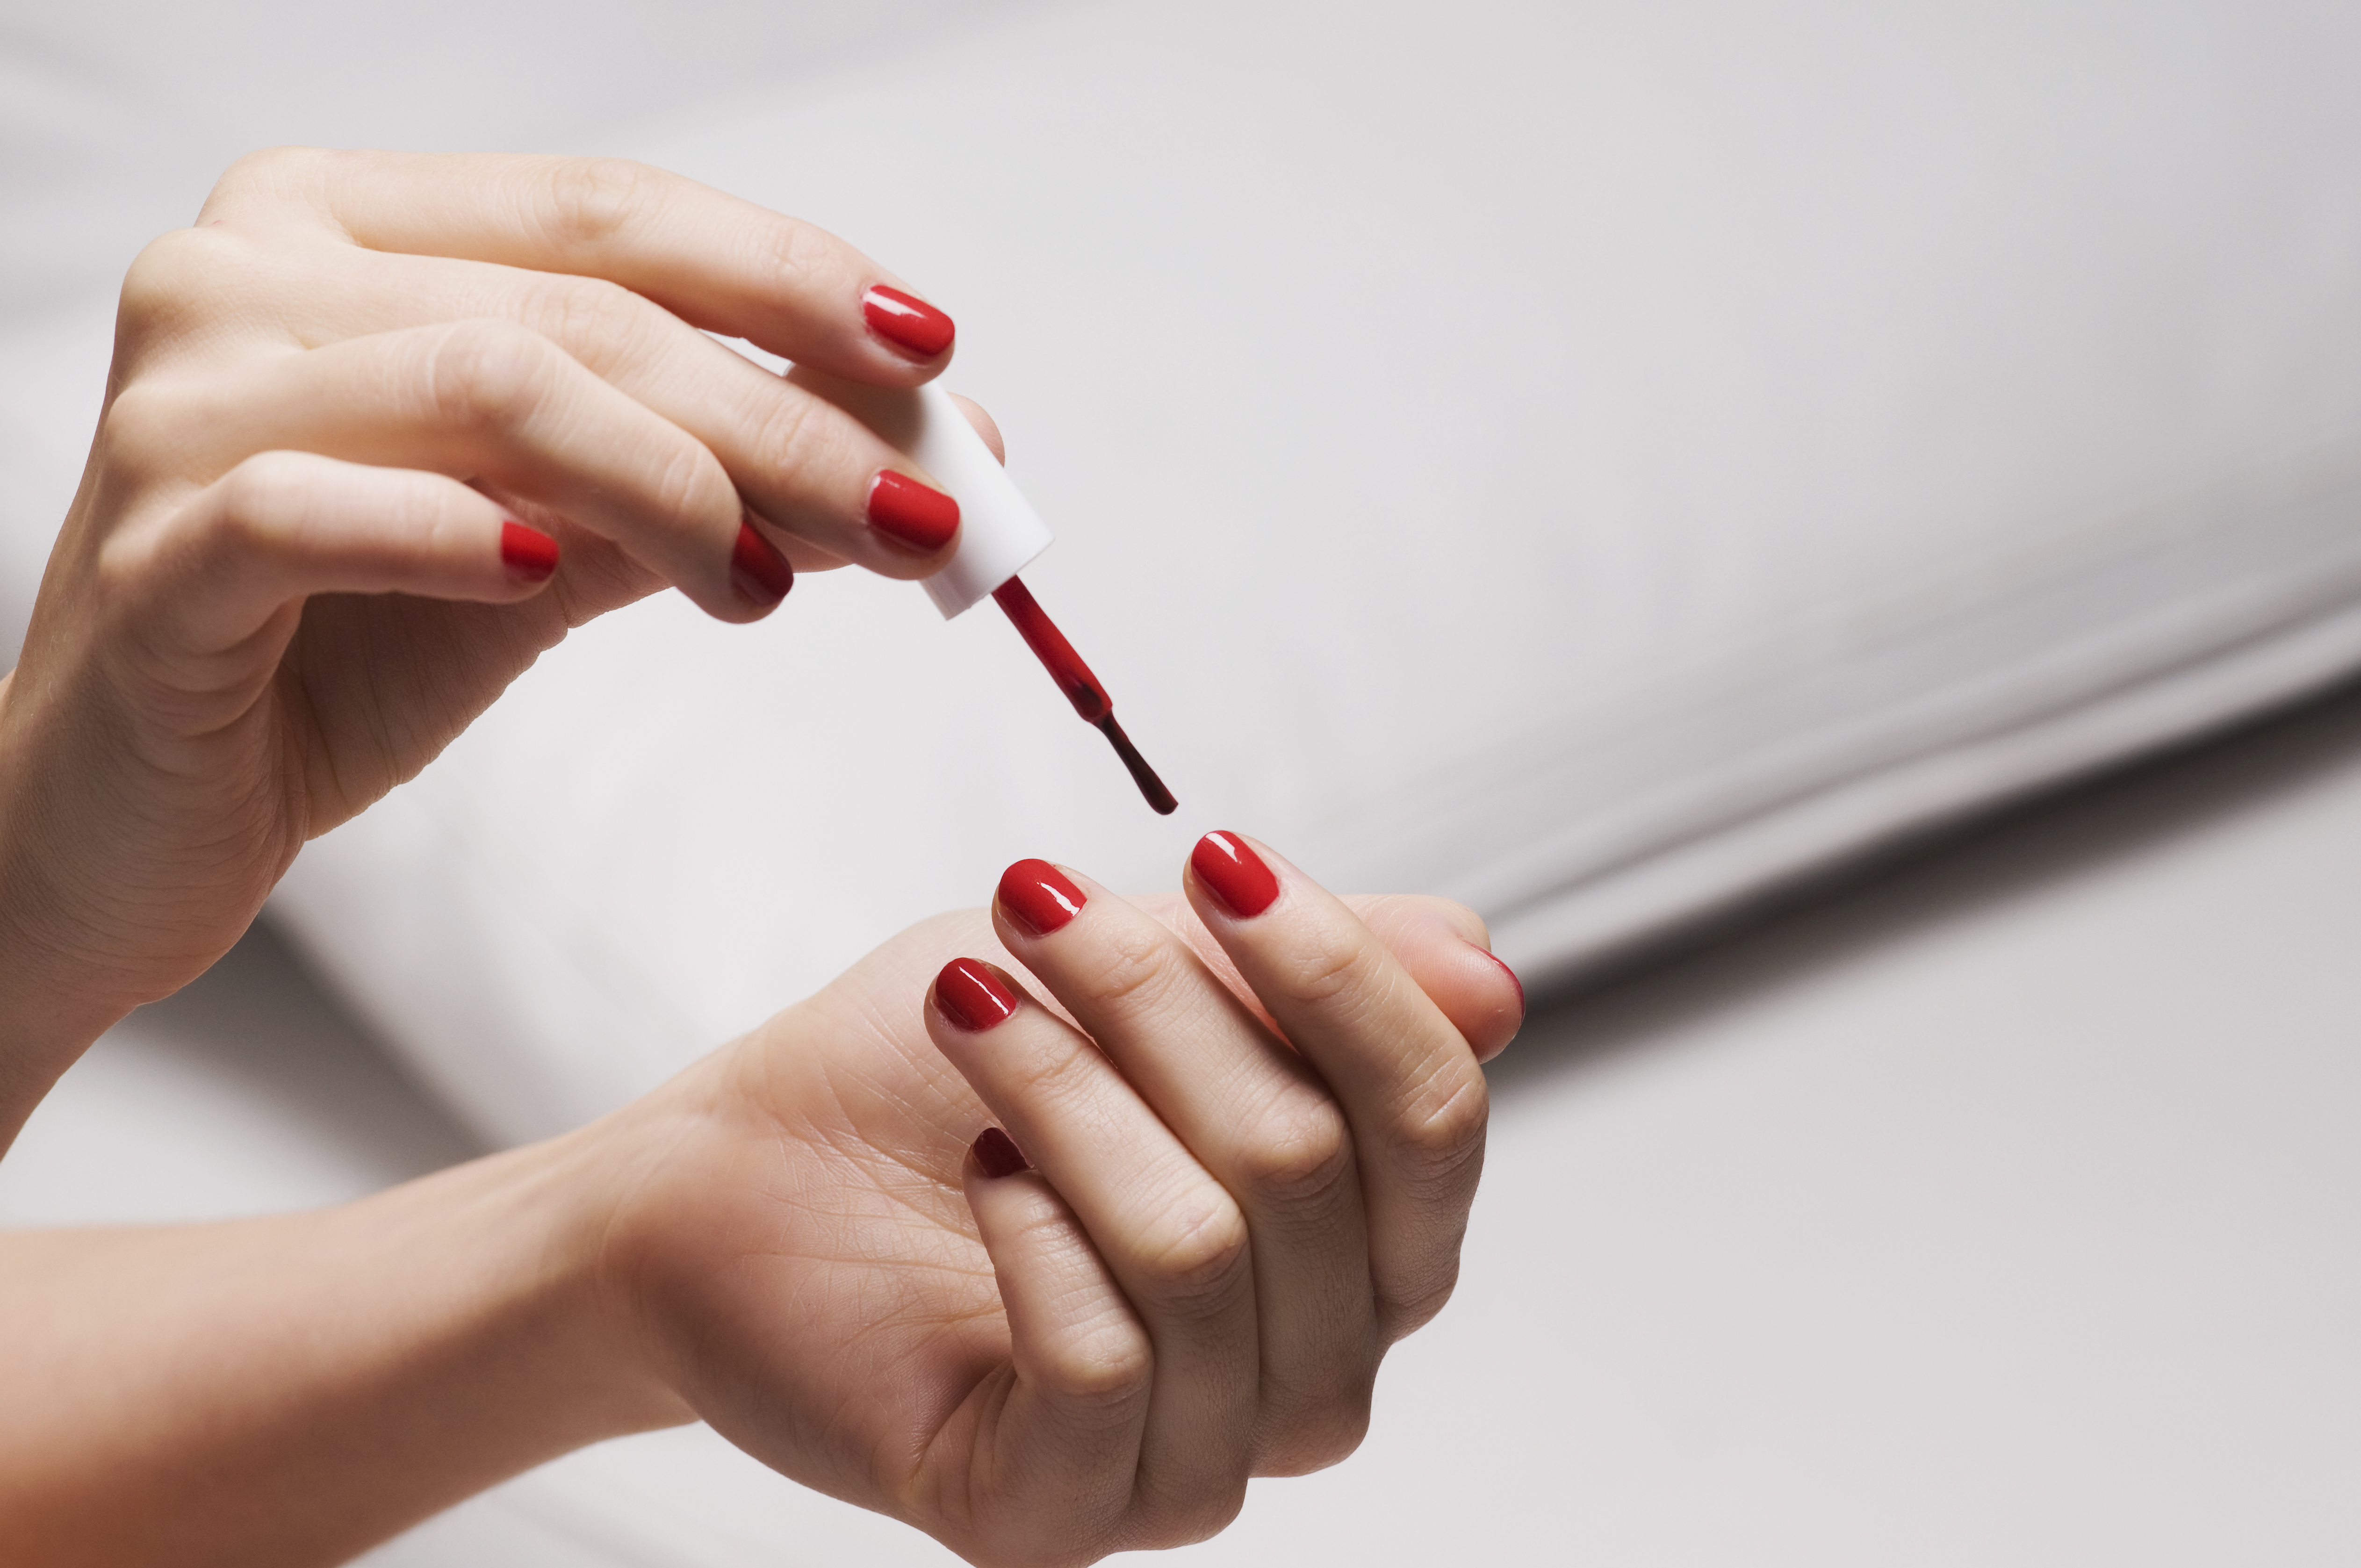 Do your nails need a break from polish